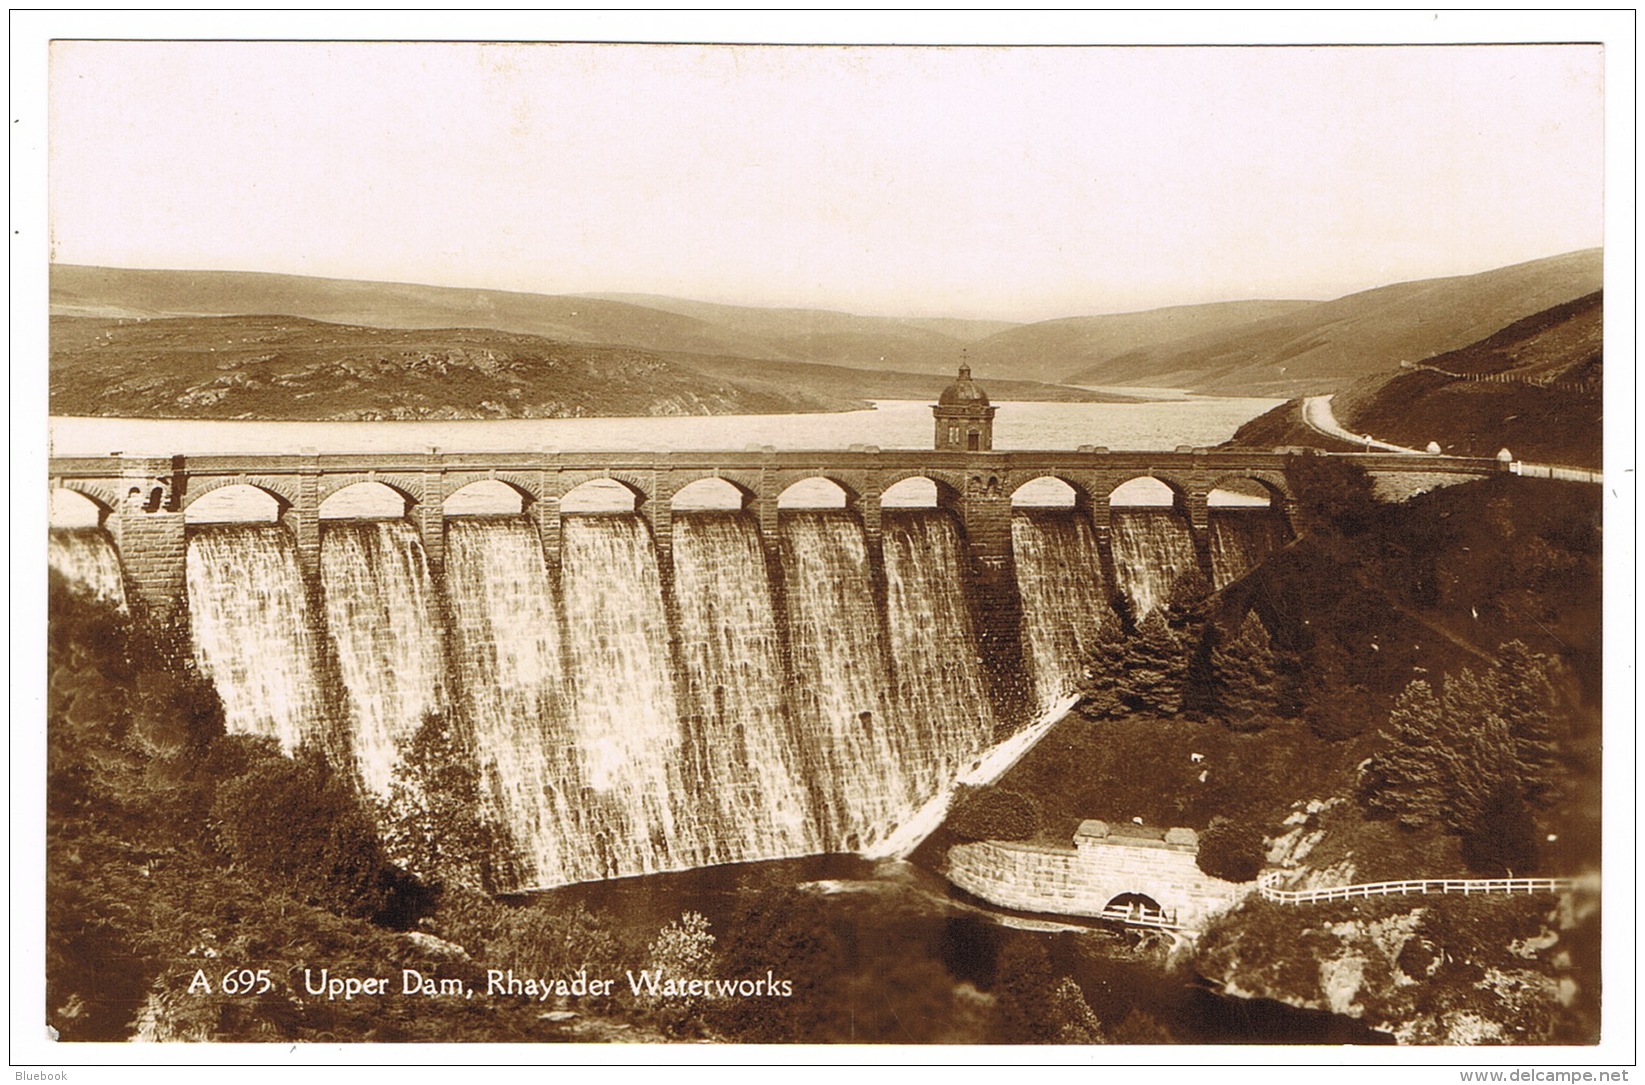 RB 1138 - Early Real Photo Postcard - Upper Dam Rhayader Waterworks - Radnorshire Wales - Radnorshire